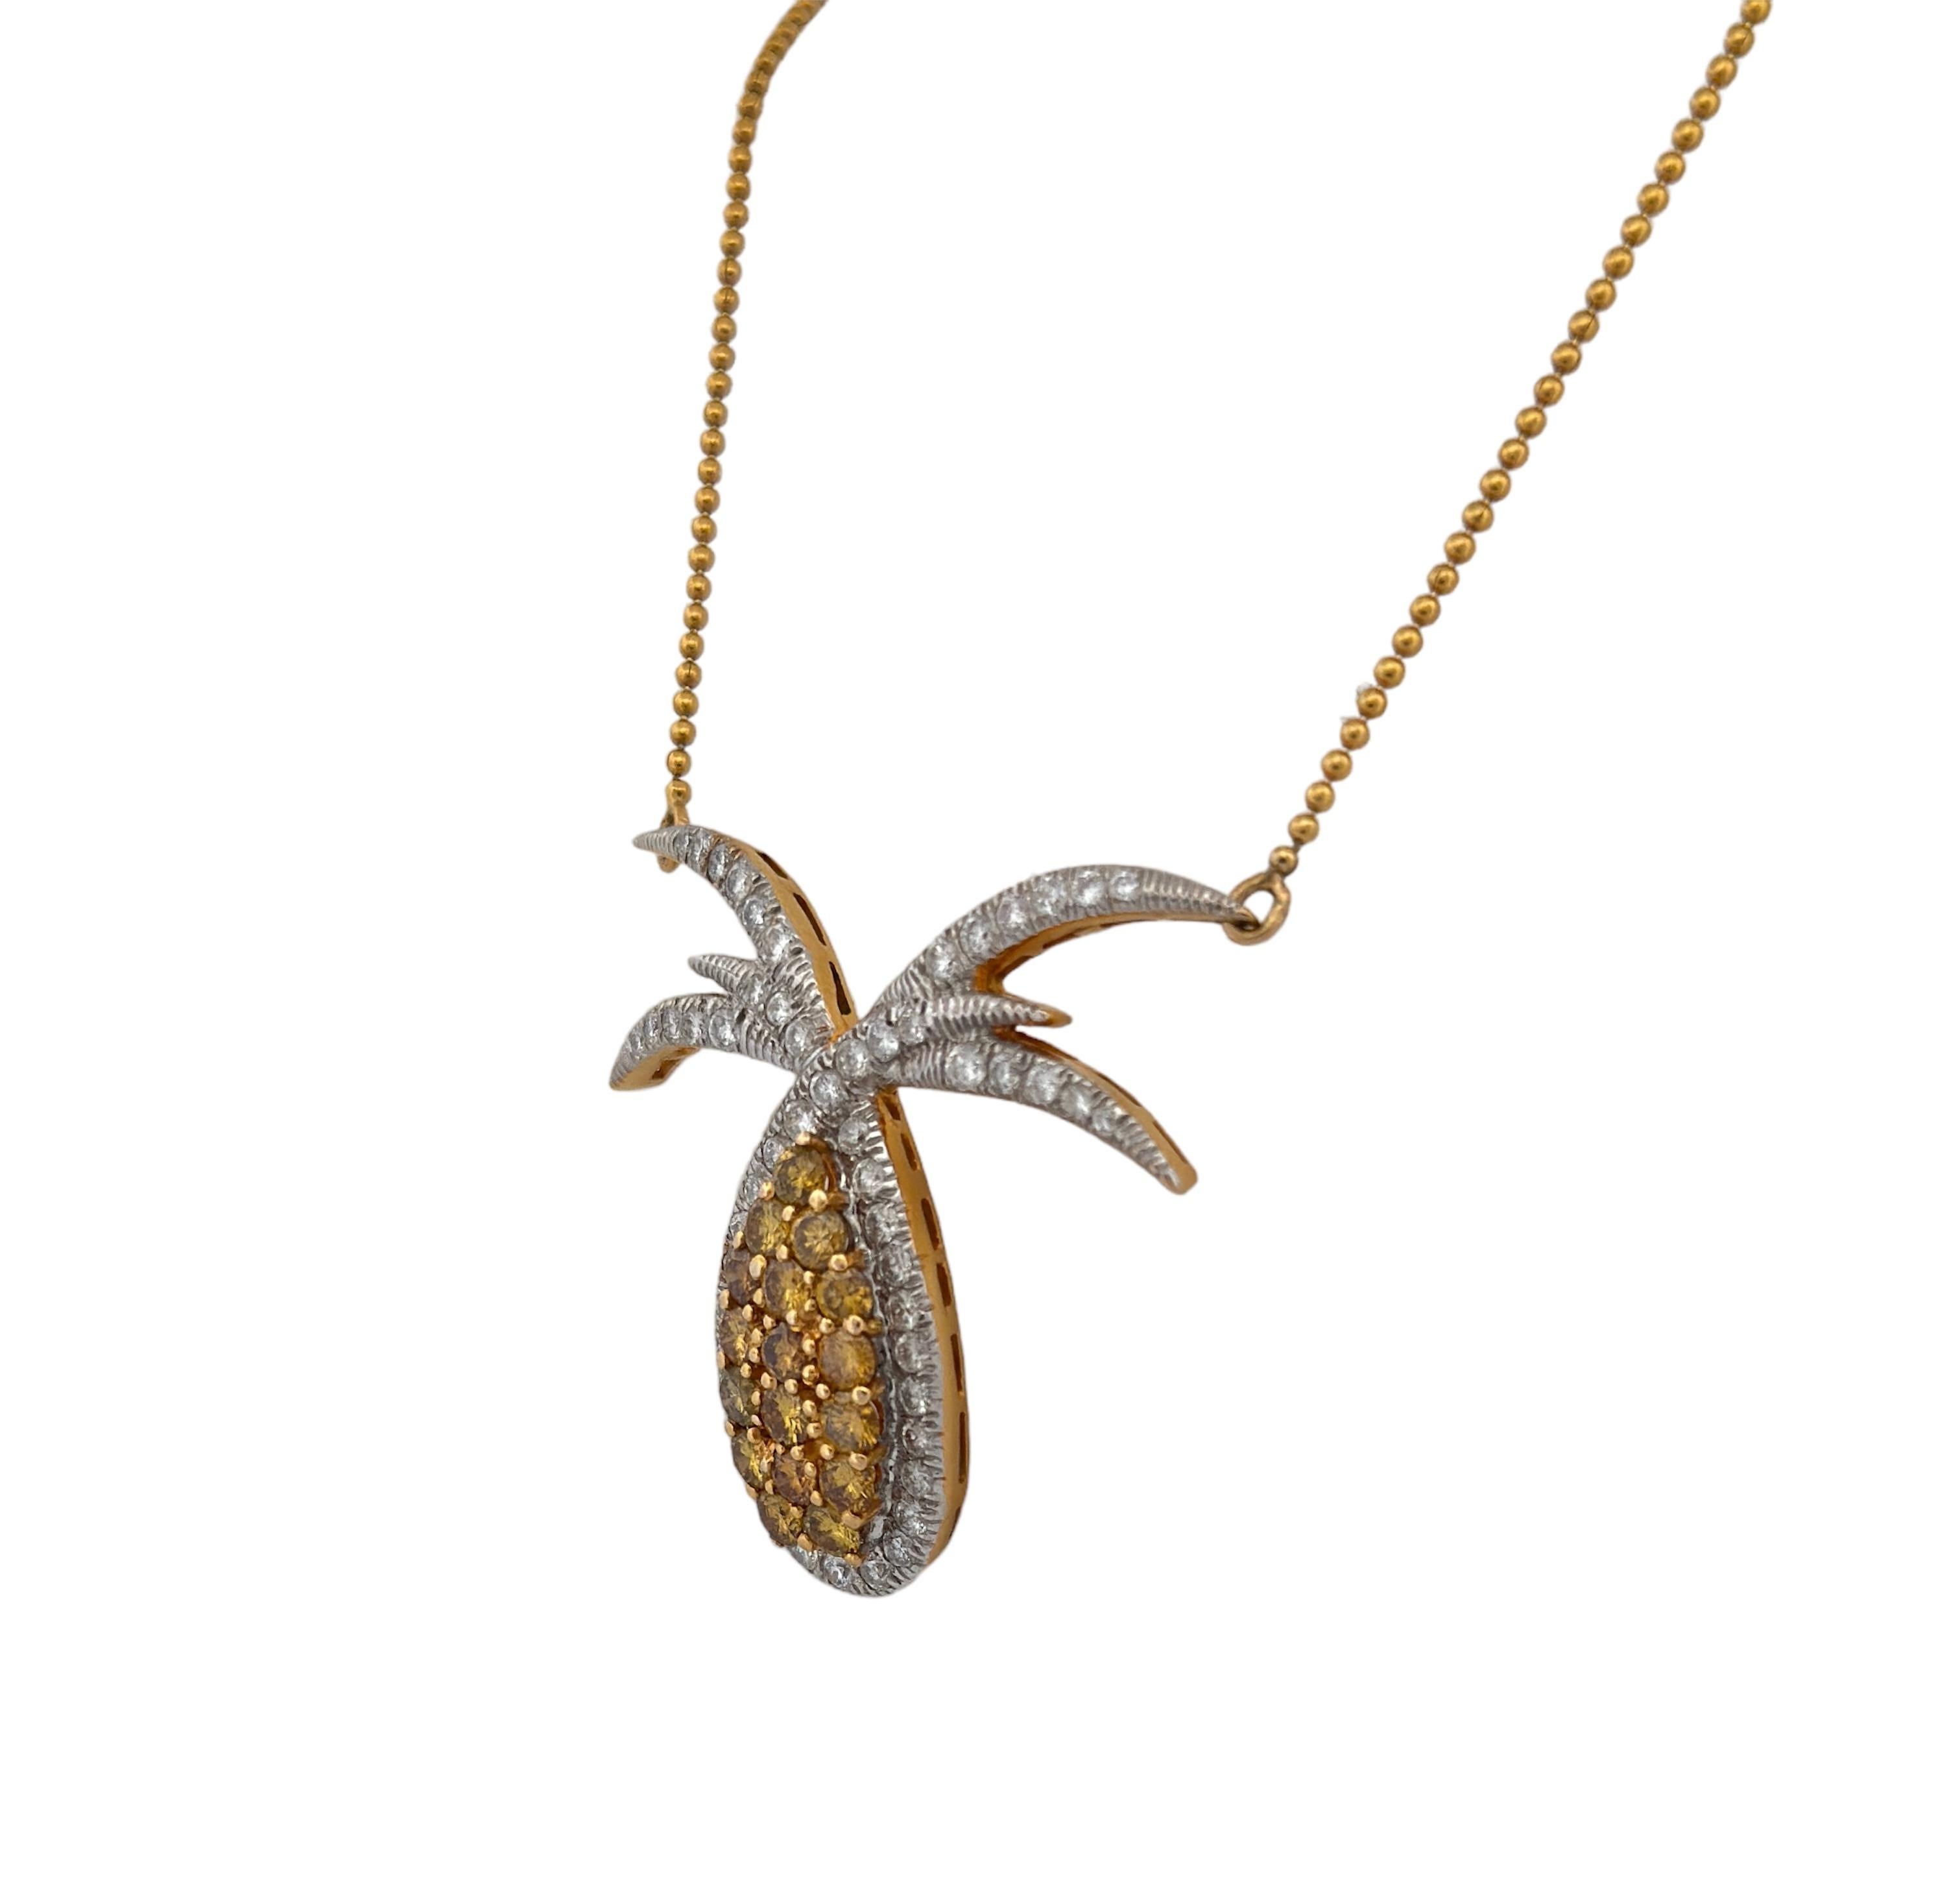 This pendant necklace, a true relic from the early 20th century, is a dazzling embodiment of vintage charm and elegance. Skillfully crafted from the warmth of 18k yellow gold, it features a stunning center With Yellow Diamonds the jewel at the heart